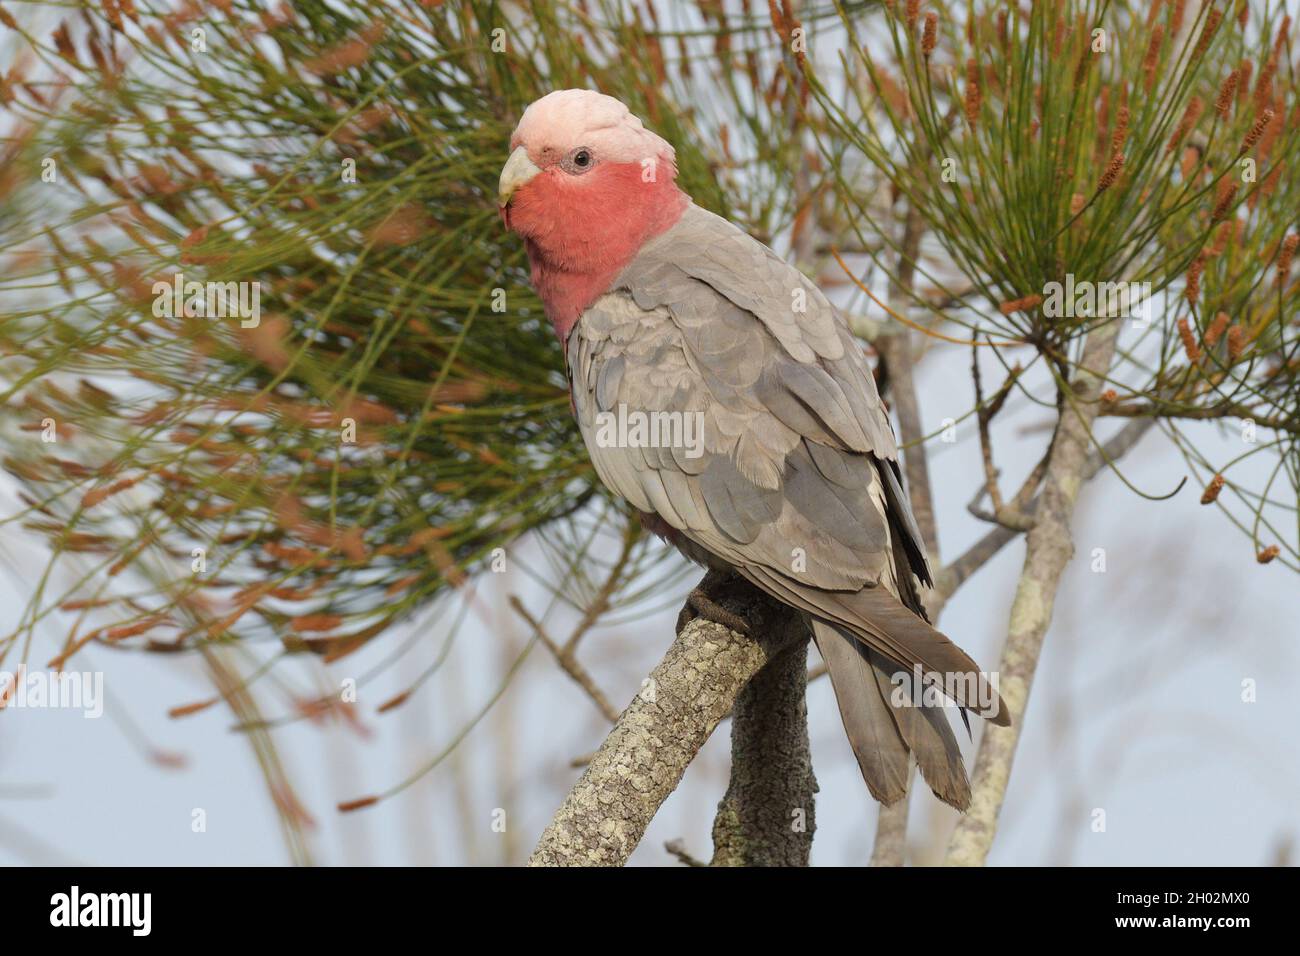 Portrait of a male Galah (Eolophus roseicapilla), or rose-breasted cockatoo in a Casuarina tree in the wild in NSW, Australia Stock Photo